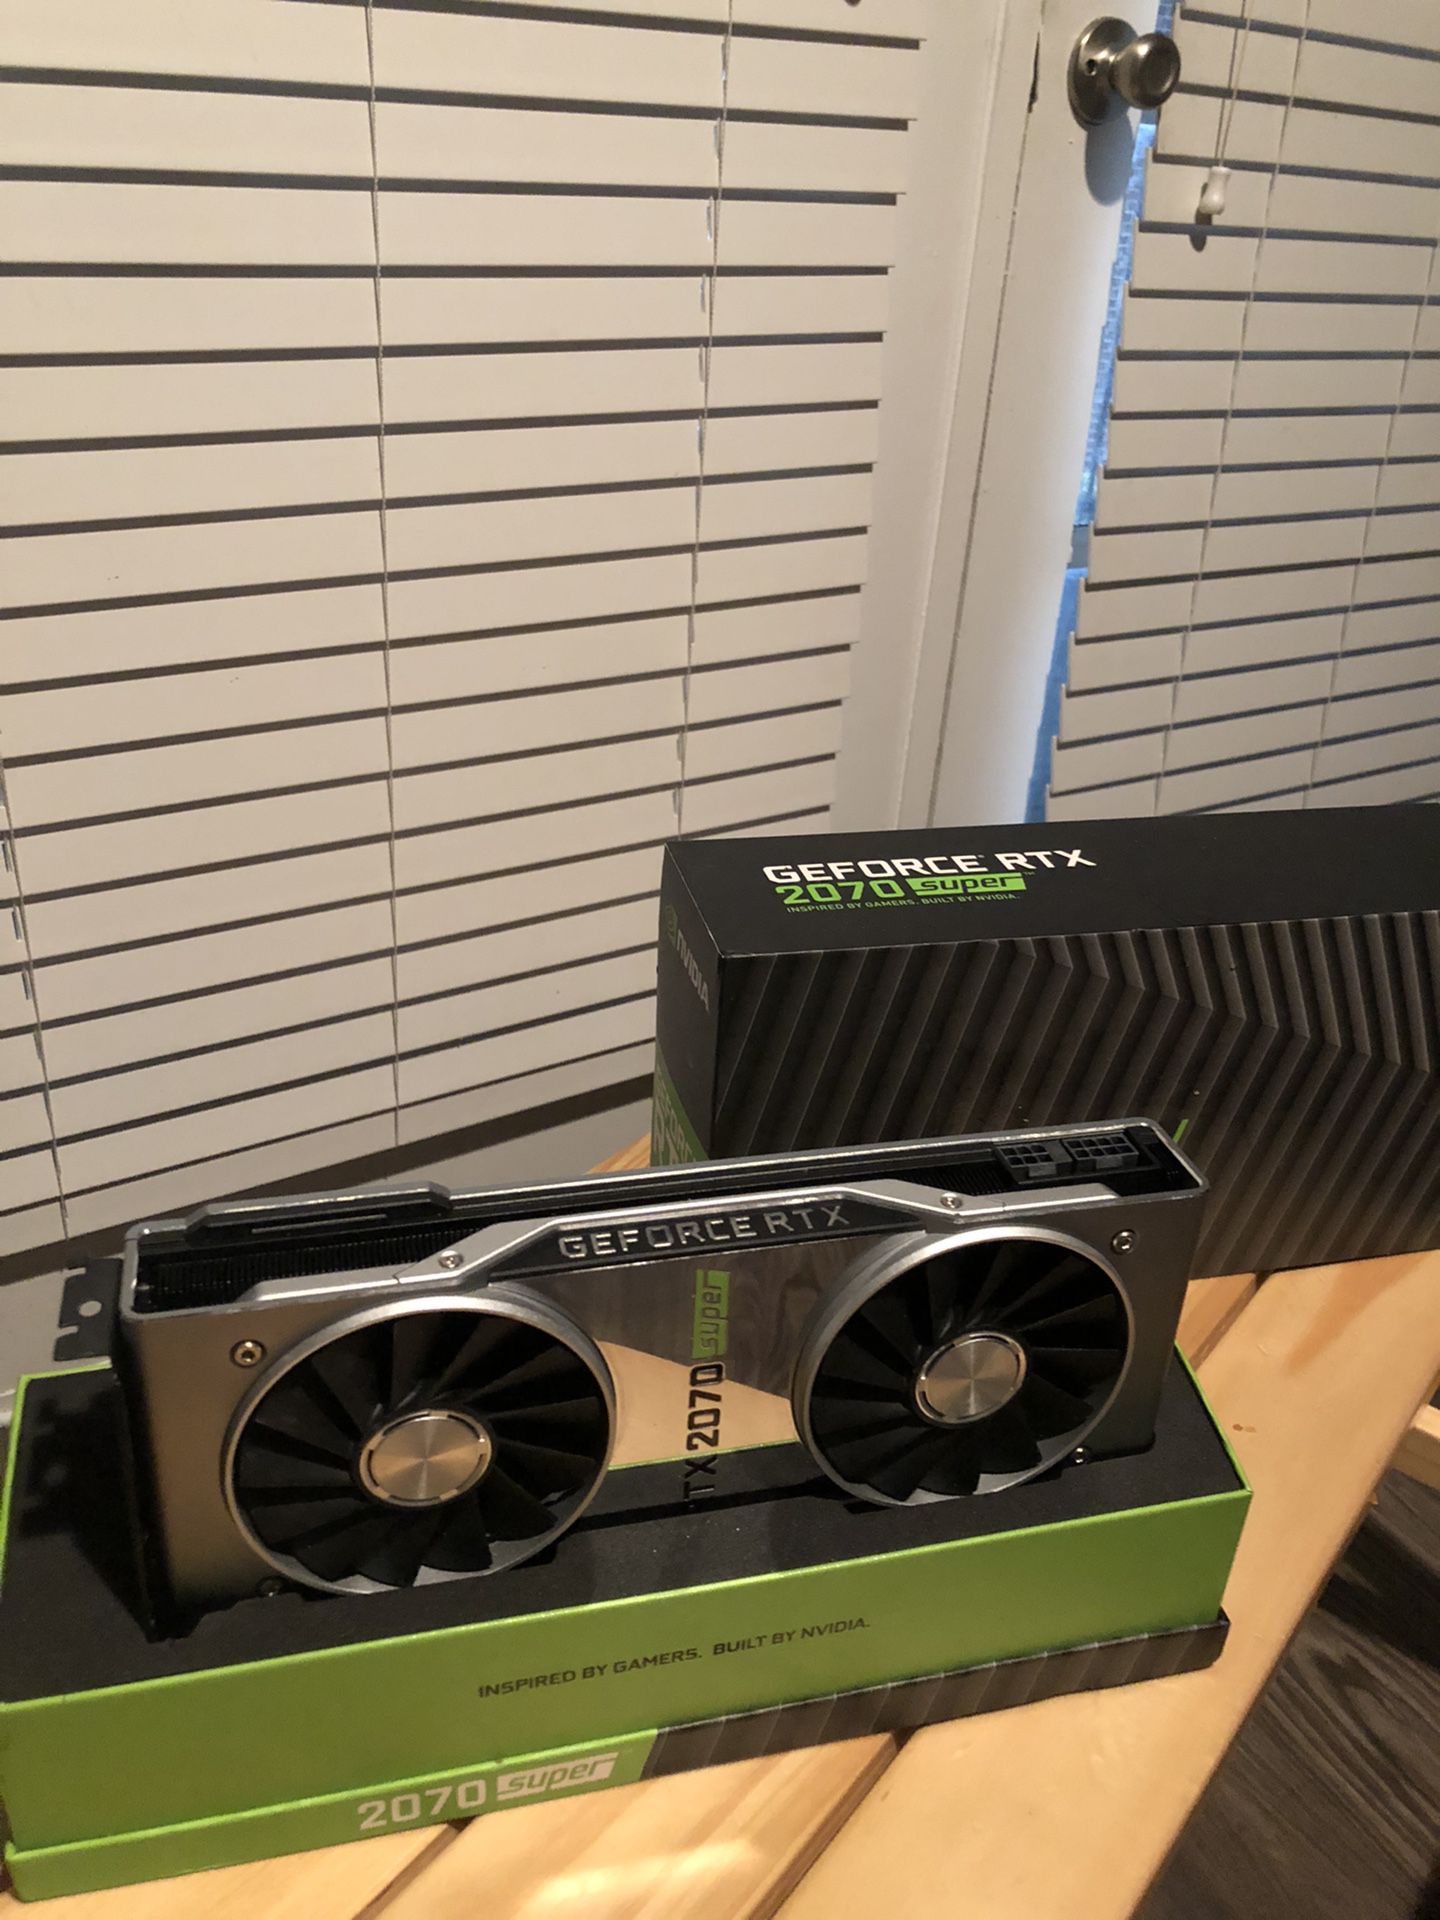 Geforce Rtx 2070 Super Founders Edition for Sale in Houston, TX